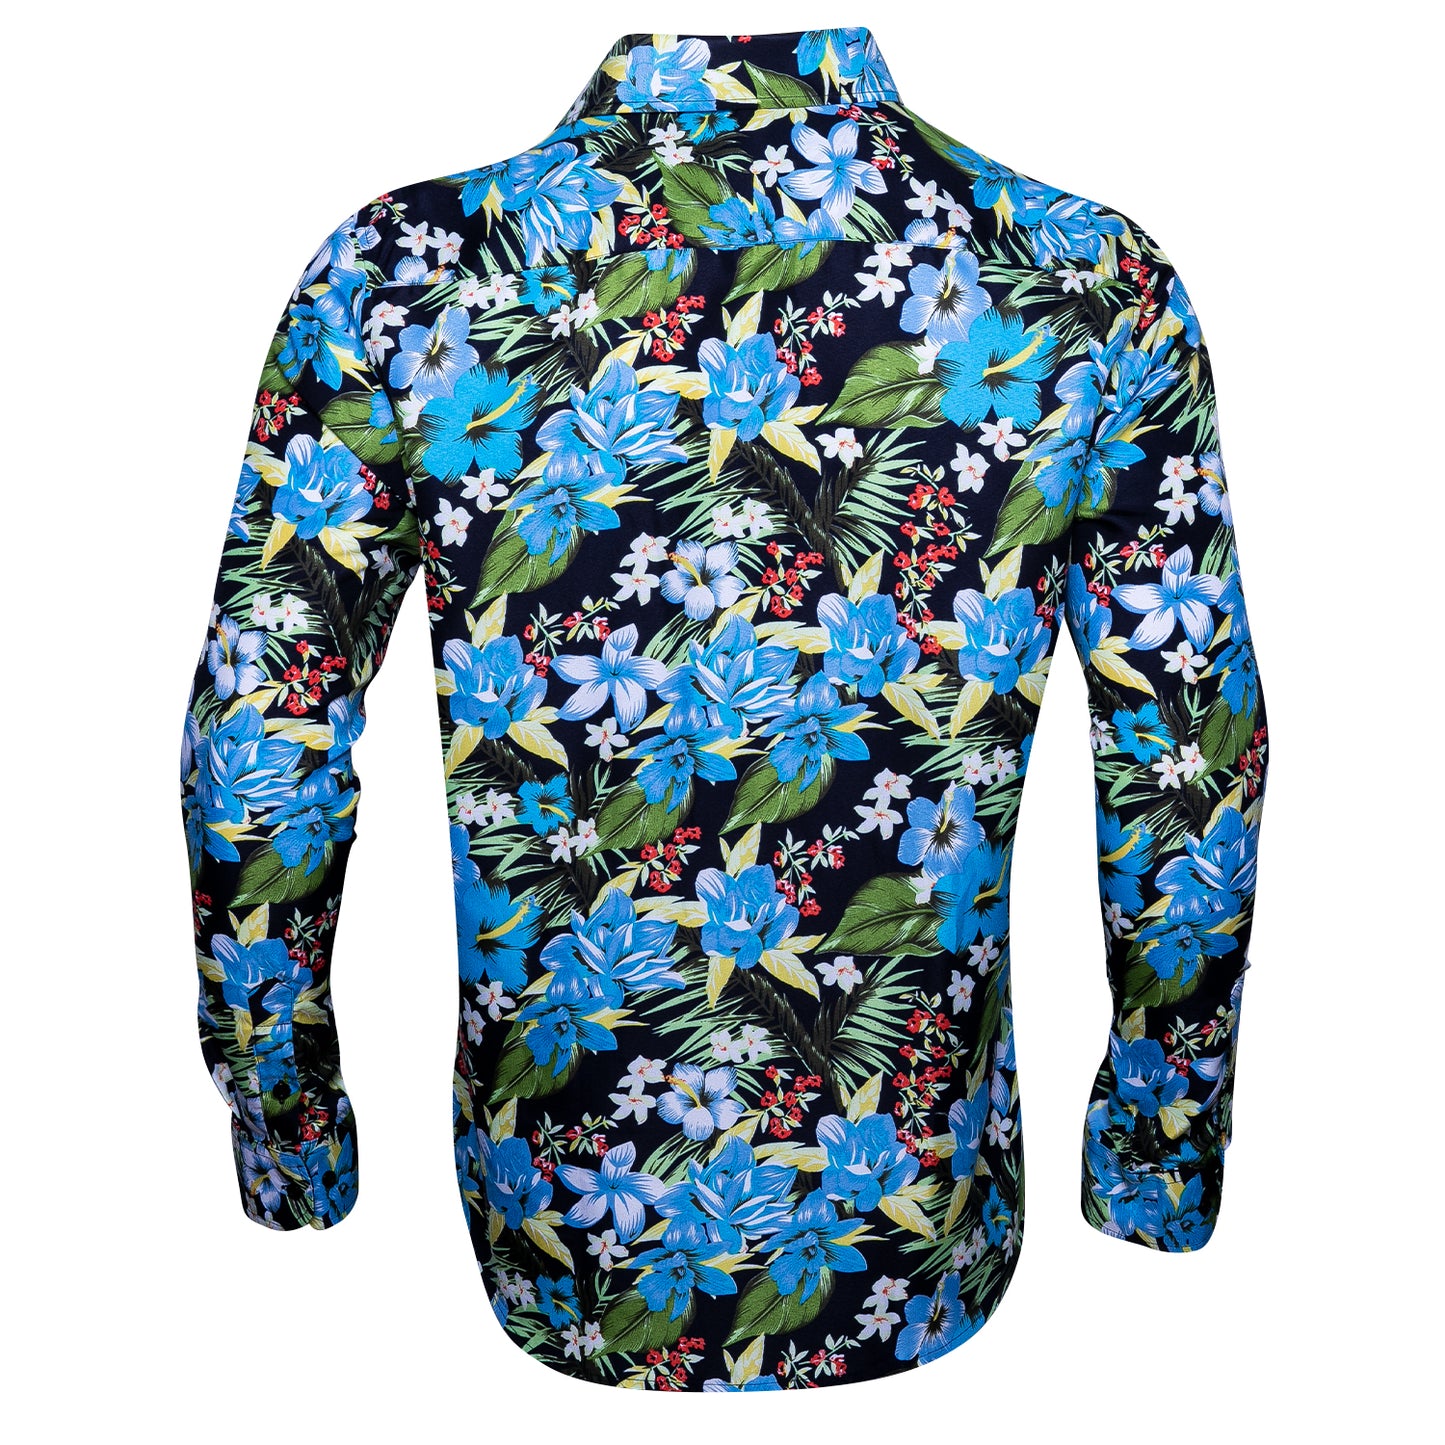 Novelty Printed Shirt - Icy Lilly